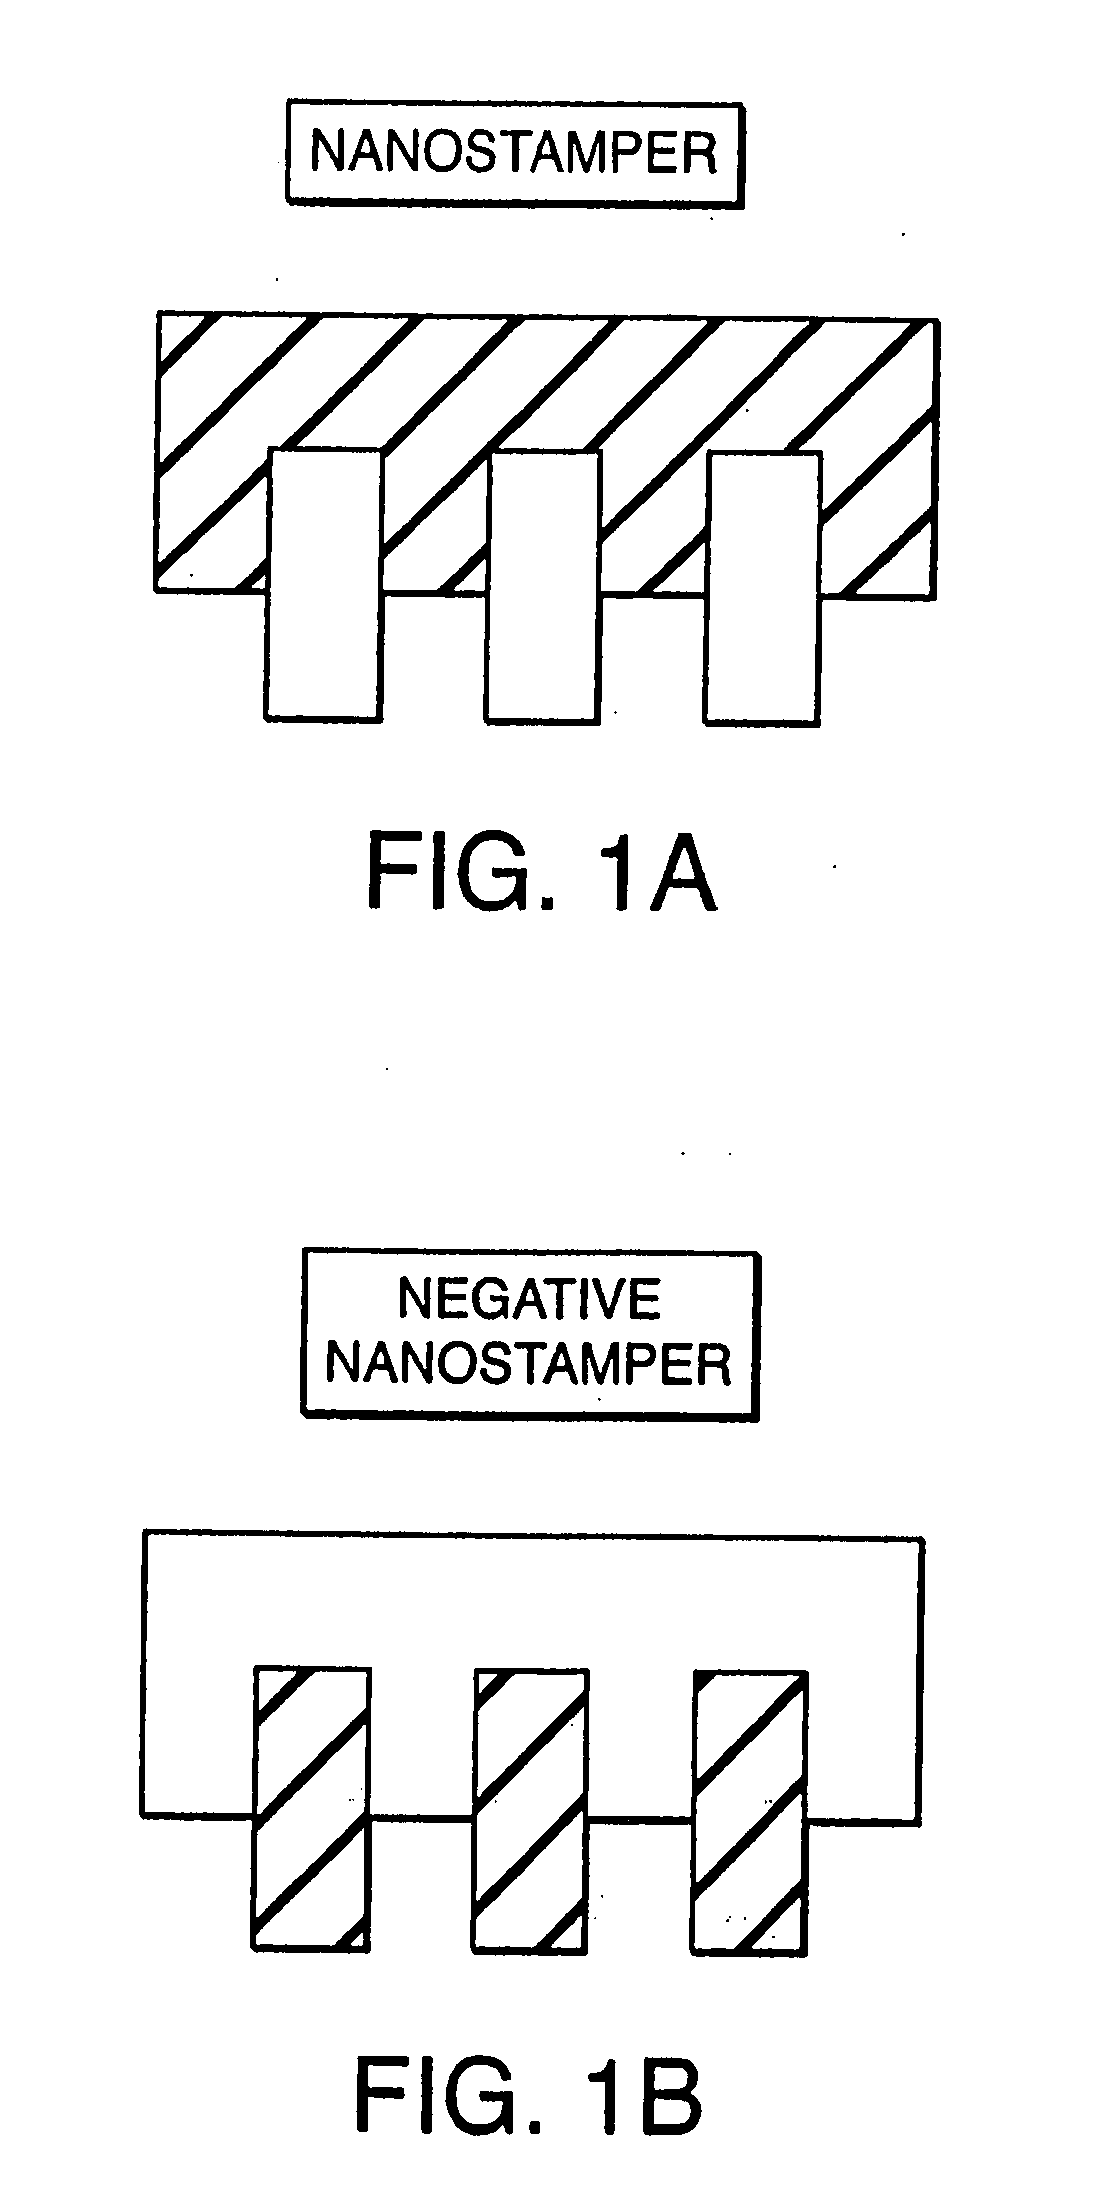 Substrates, devices, and methods for cellular assays